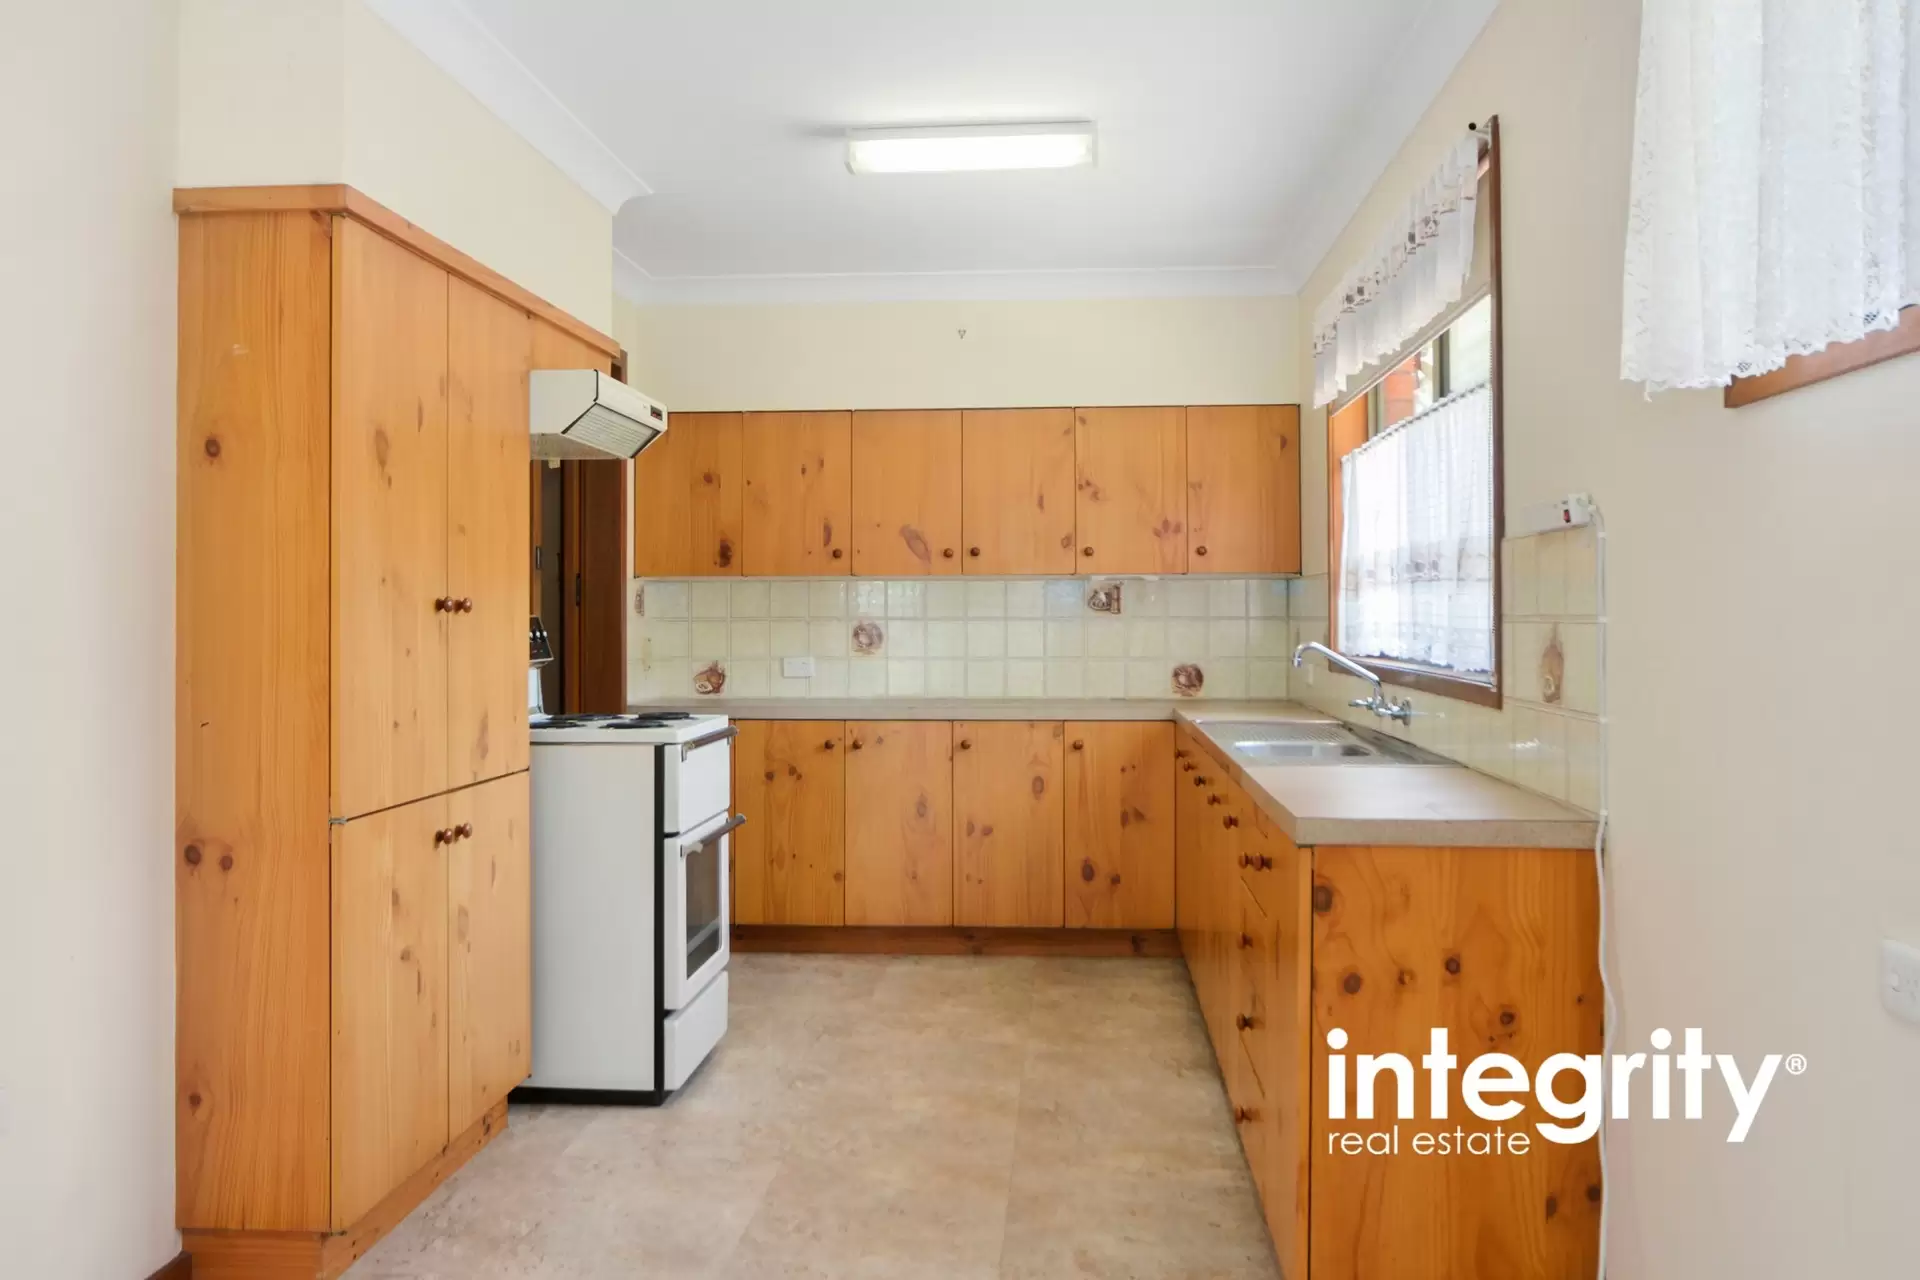 3/52 Tarawal Street, Bomaderry Sold by Integrity Real Estate - image 3